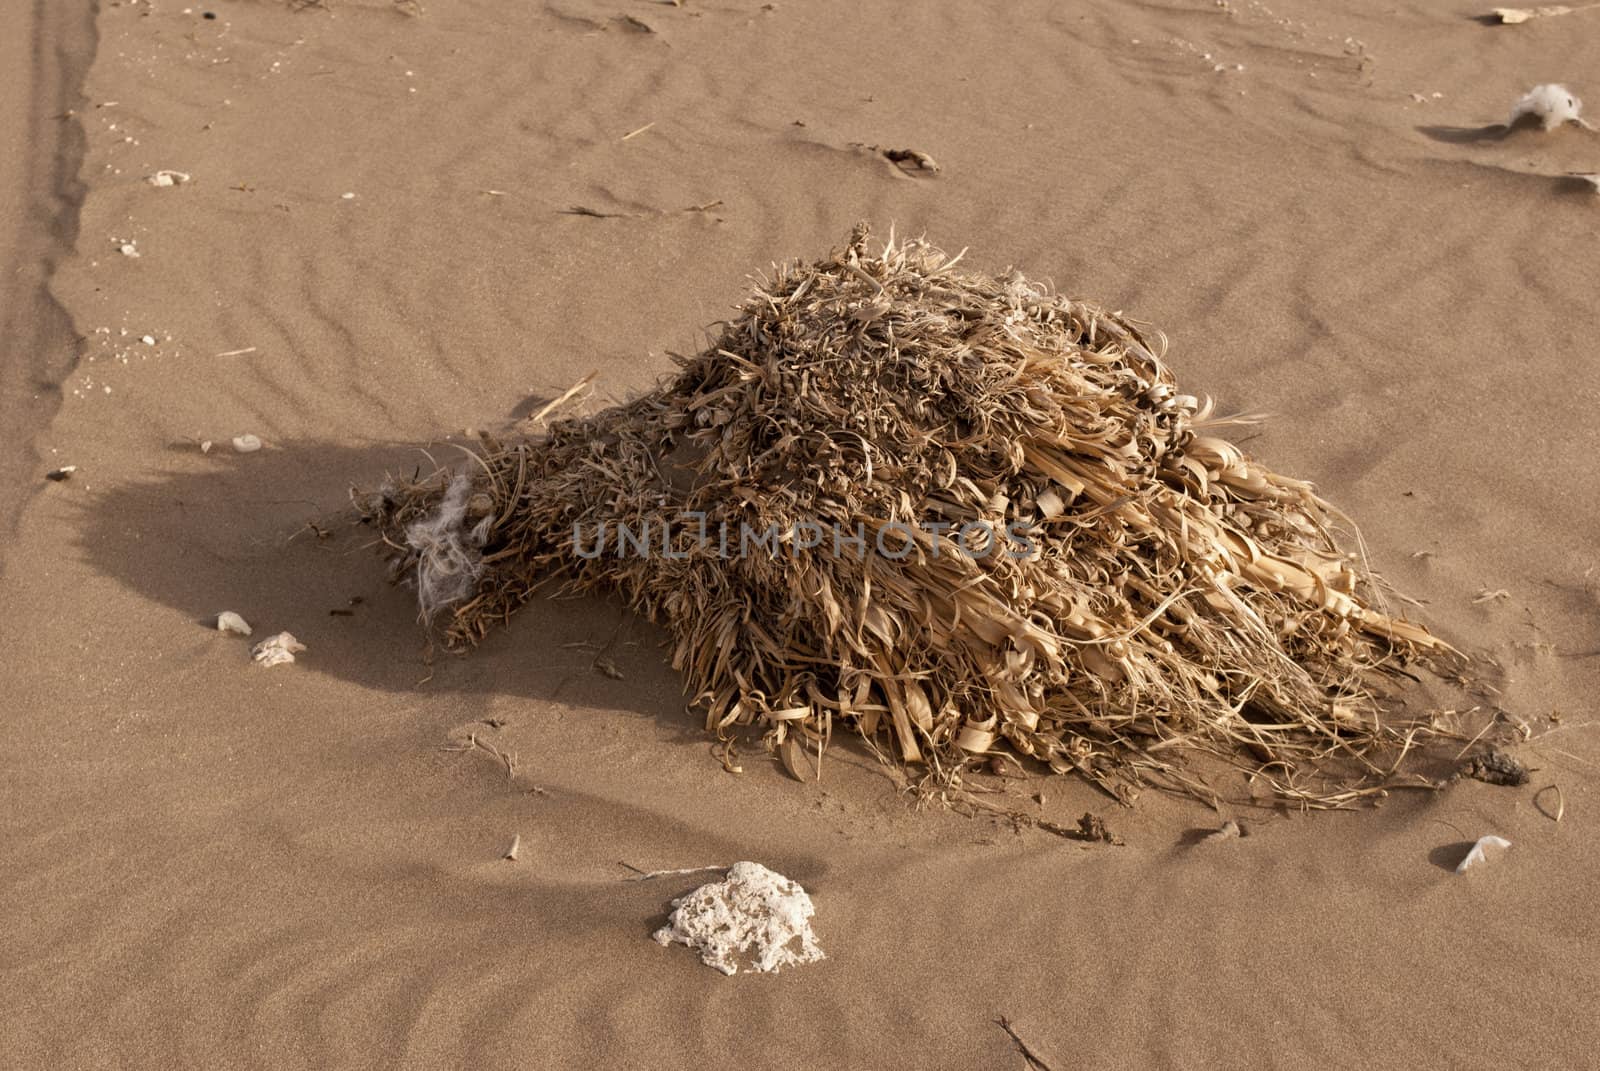 dry shrub in the sand